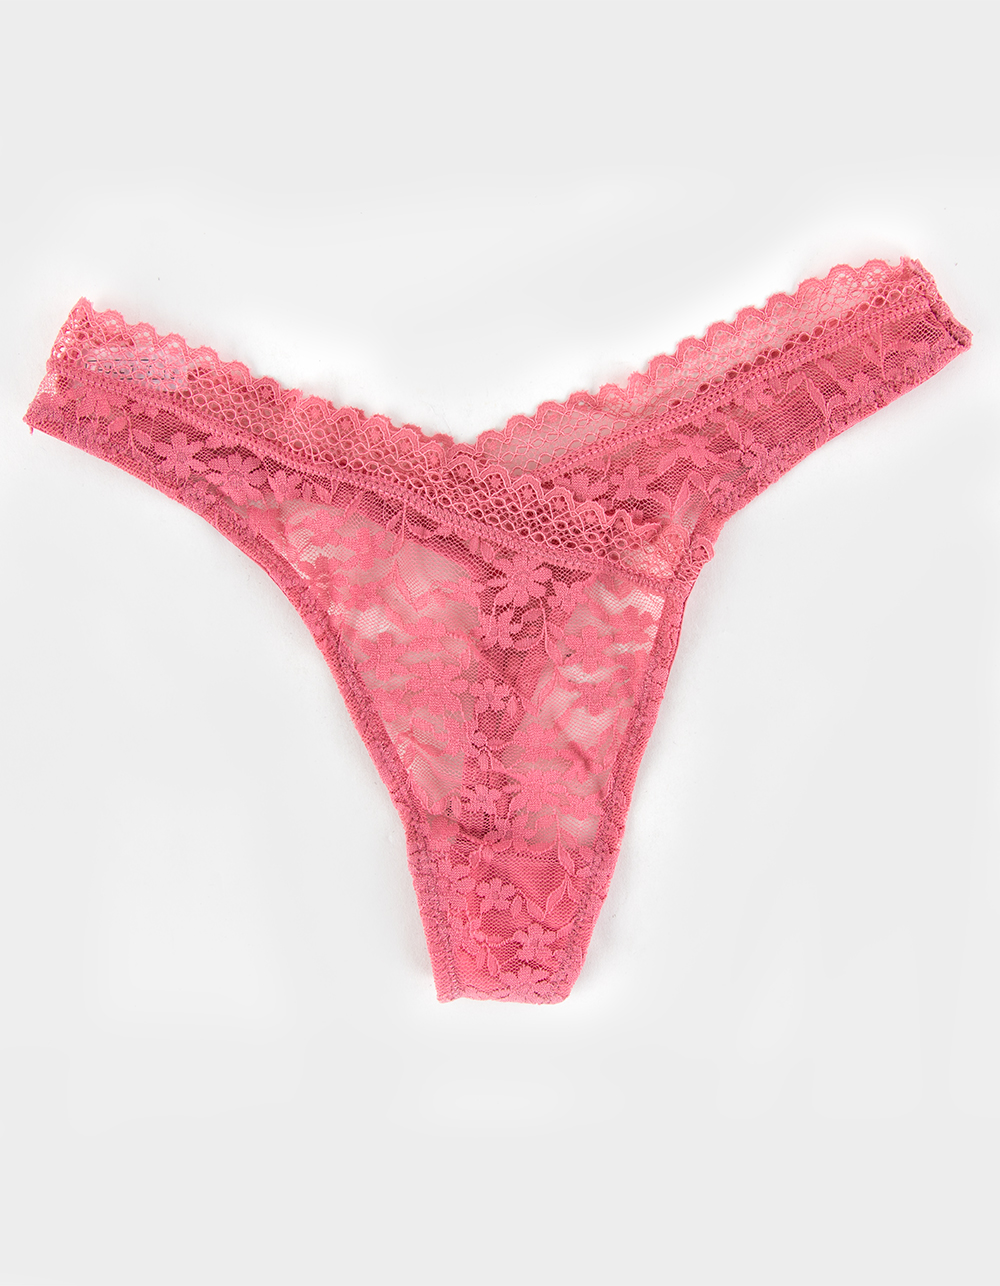 Buy Bright Pink Luxury Floral Lace High Leg Knickers 8, Knickers